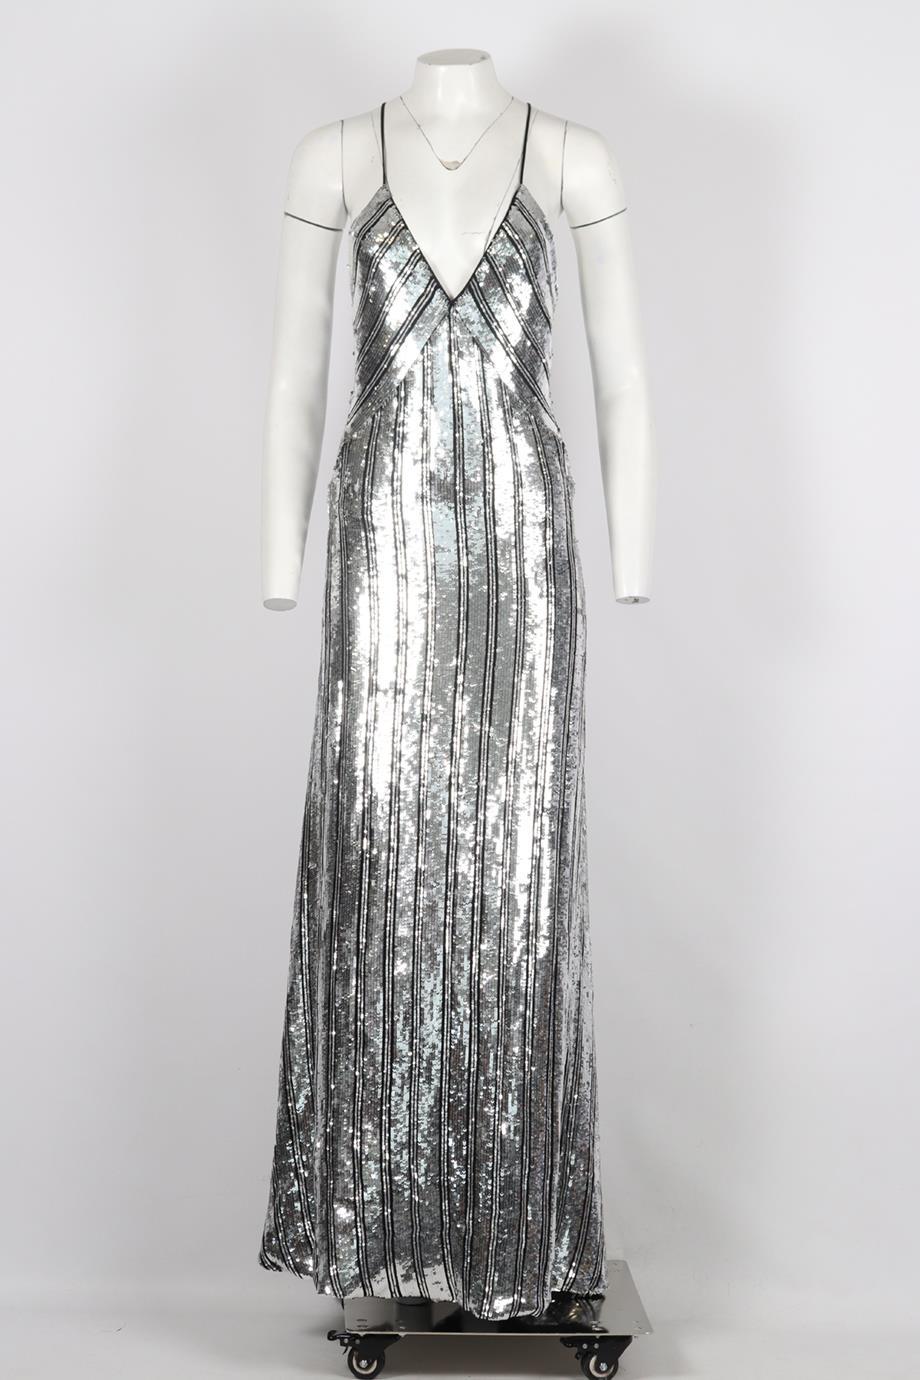 Galvan London Sequined Chiffon Maxi Dress. Silver and black. Sleeveless. Slips on. 100% Viscose. 100% Polyester. FR 38 (UK 10, US 6, IT 42). Bust: 30.8 in. Hips: 33.9 in. Length: 51.8 in. Condition: Used. Very good condition - Light signs of wear;